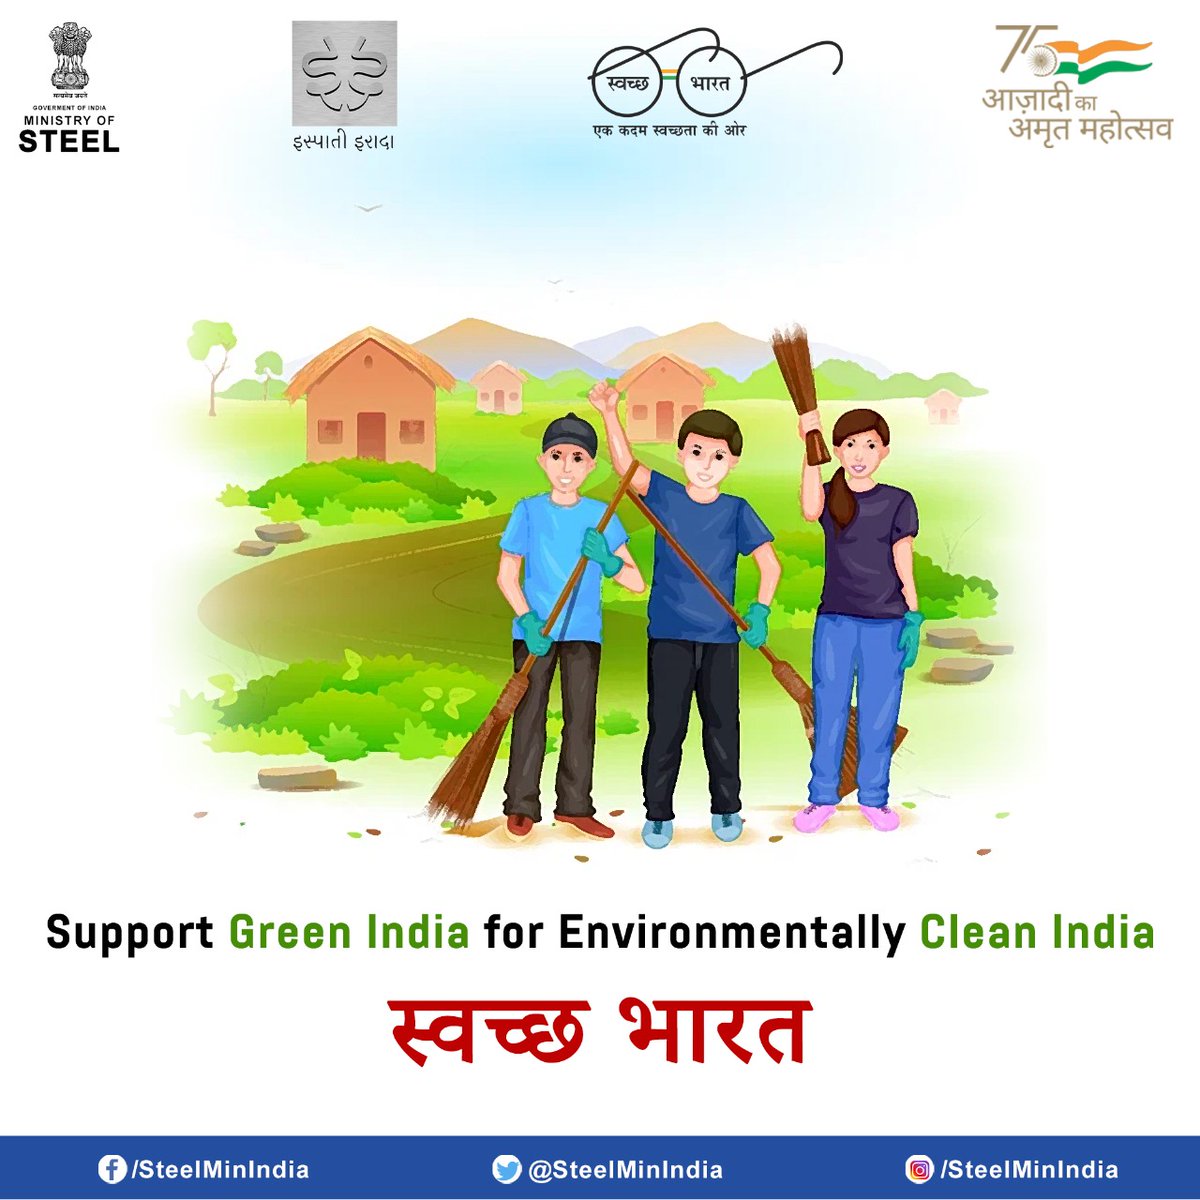 If you dream of a developed nation, a clean India should be your mission. #SpecialCampaign2.0 #SwachhBharat #CleanIndiaGreenIndia @DARPG_GoI @JM_Scindia @Officejmscindia @fskulaste @AmritMahotsav